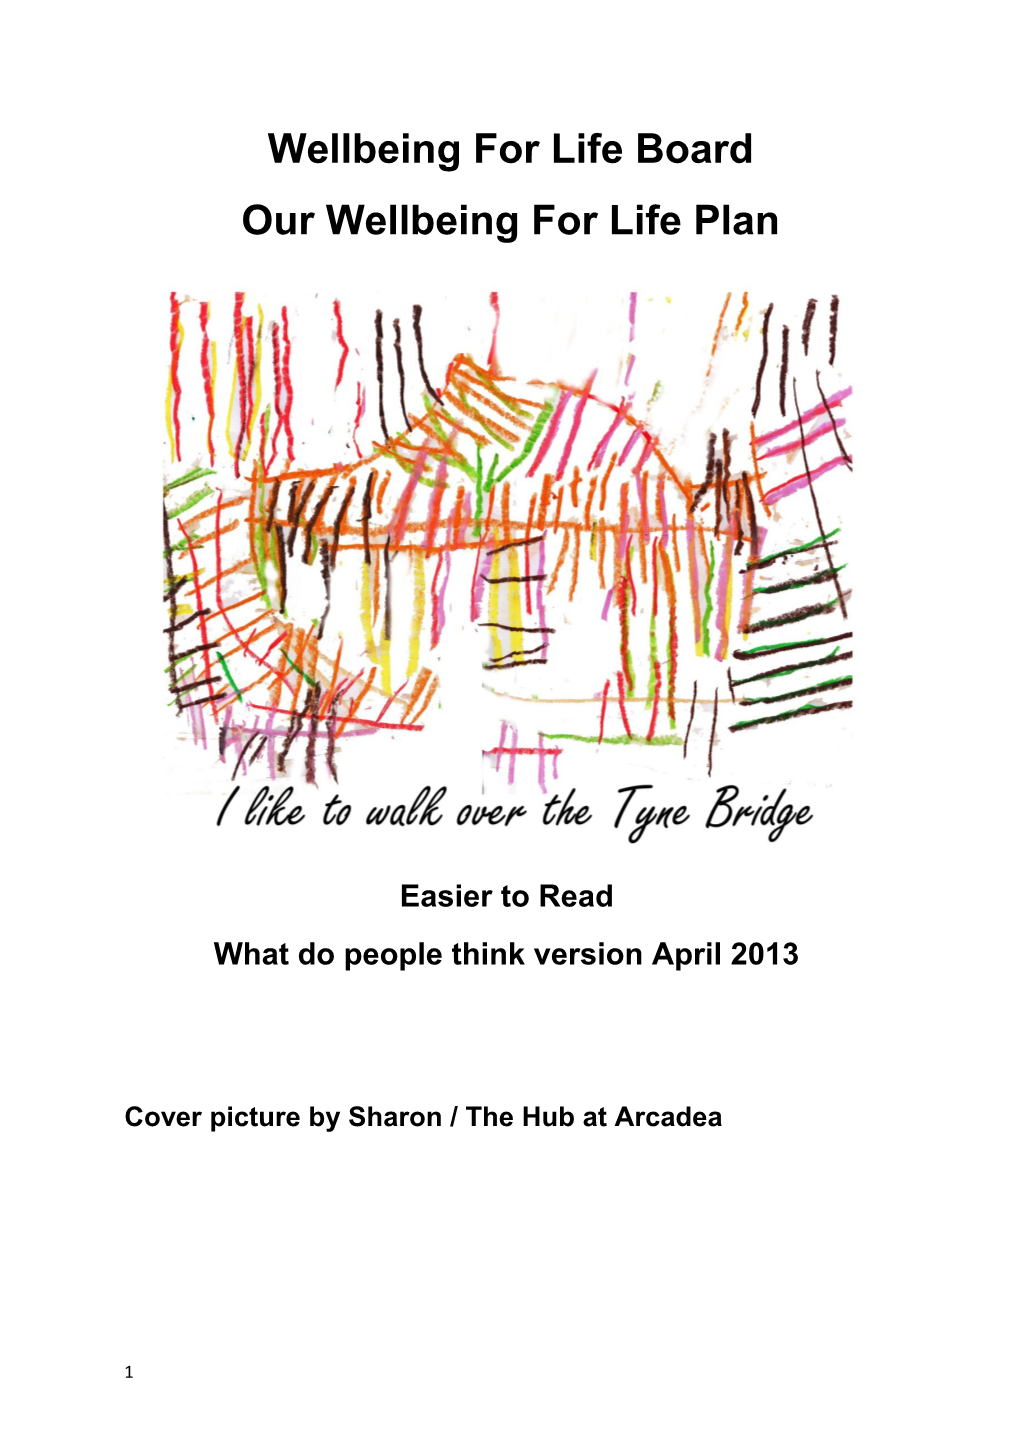 Wellbeing for Life Board